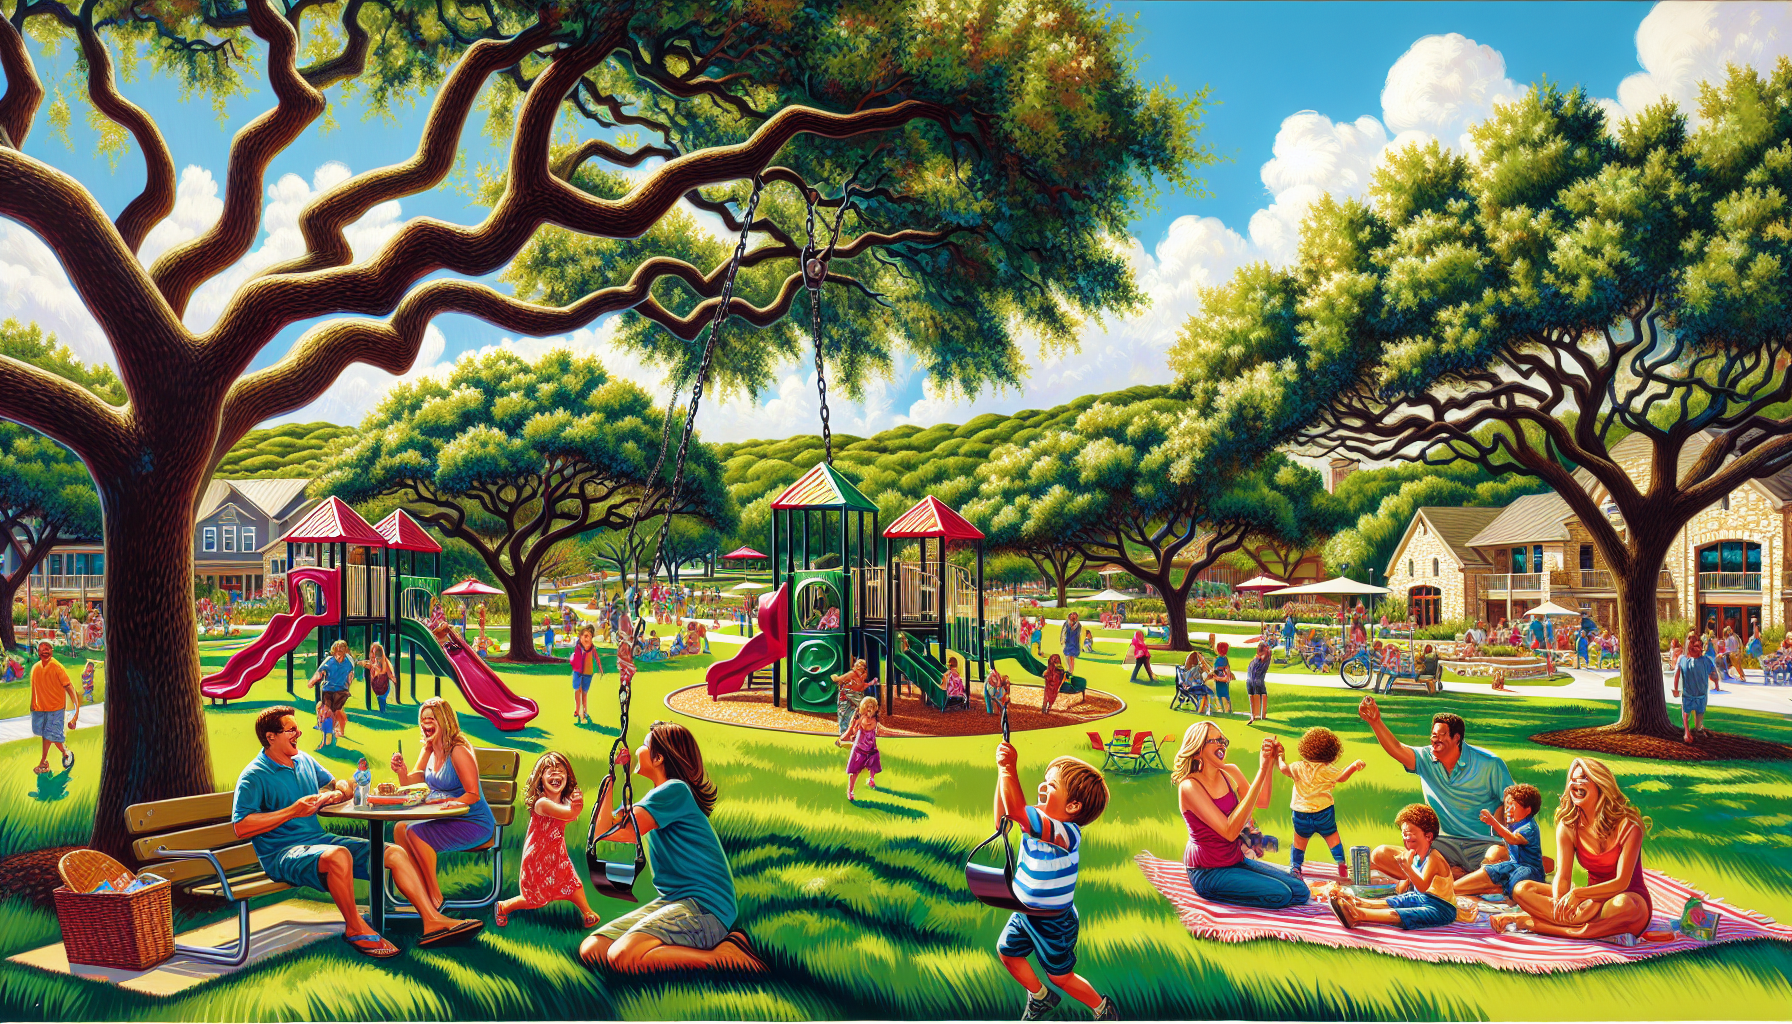 Families enjoying a day at a park in Leander, Texas